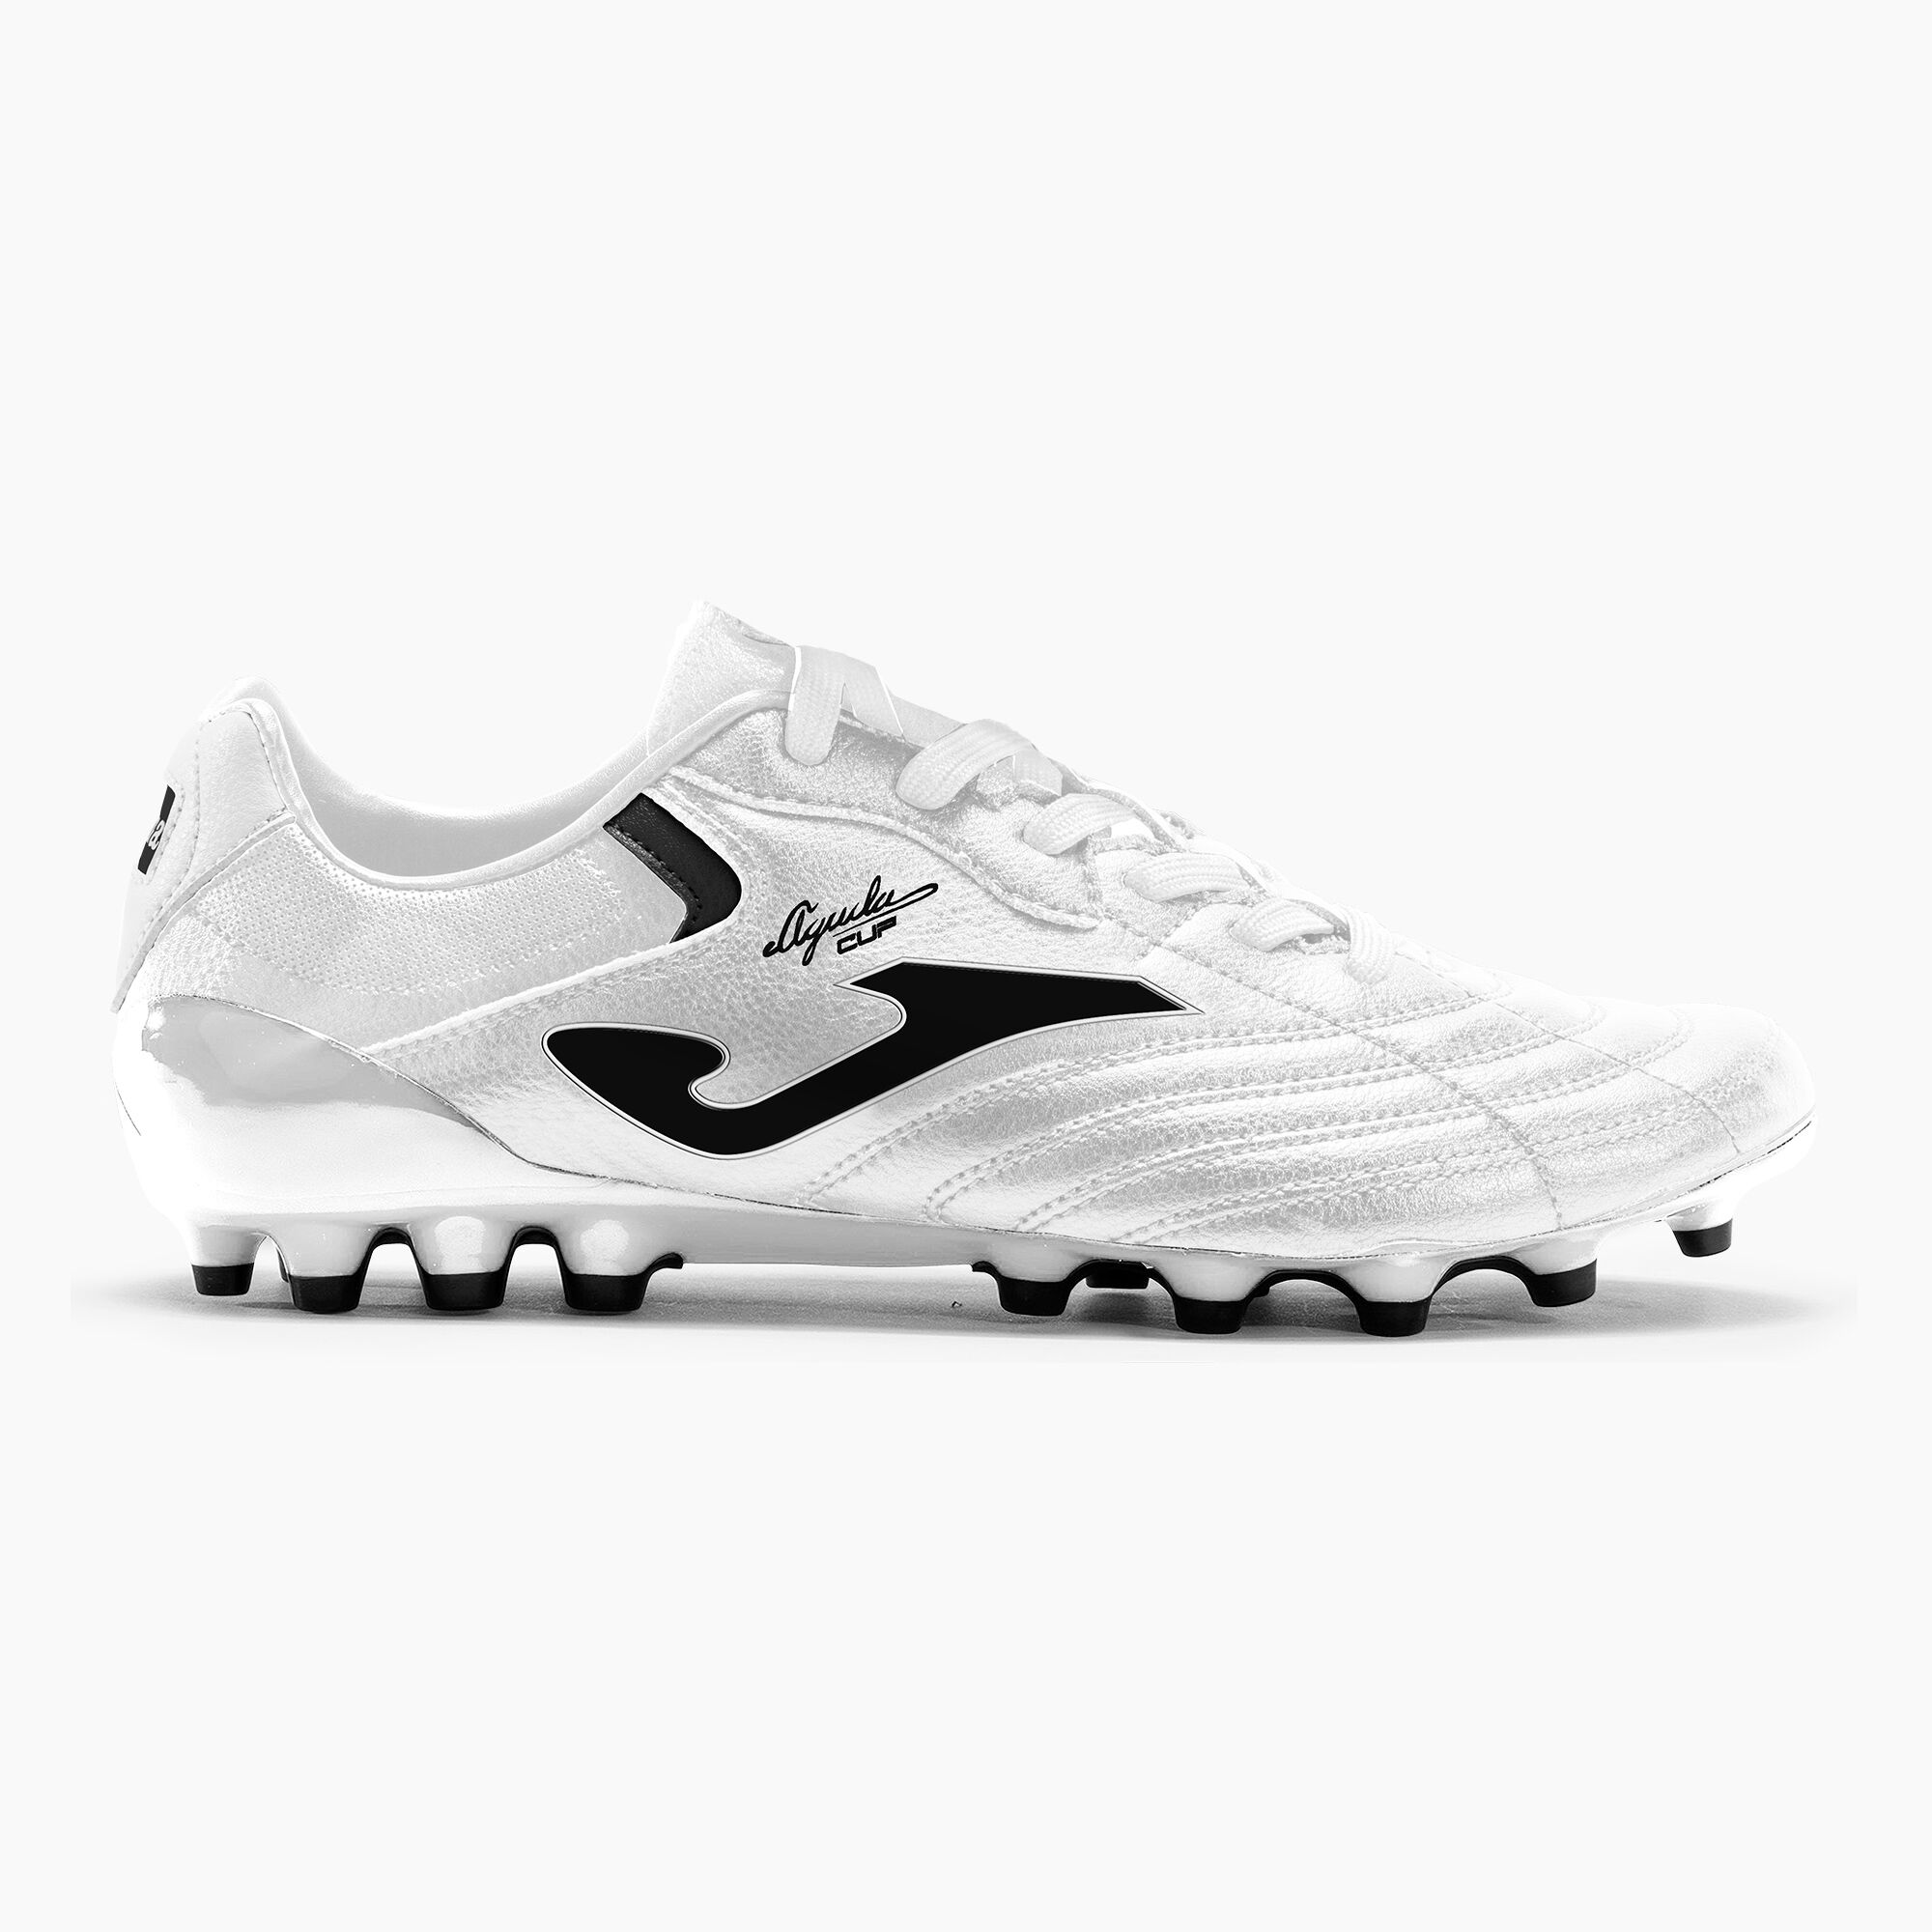 Football boots Aguila Cup 24 artificial grass white black